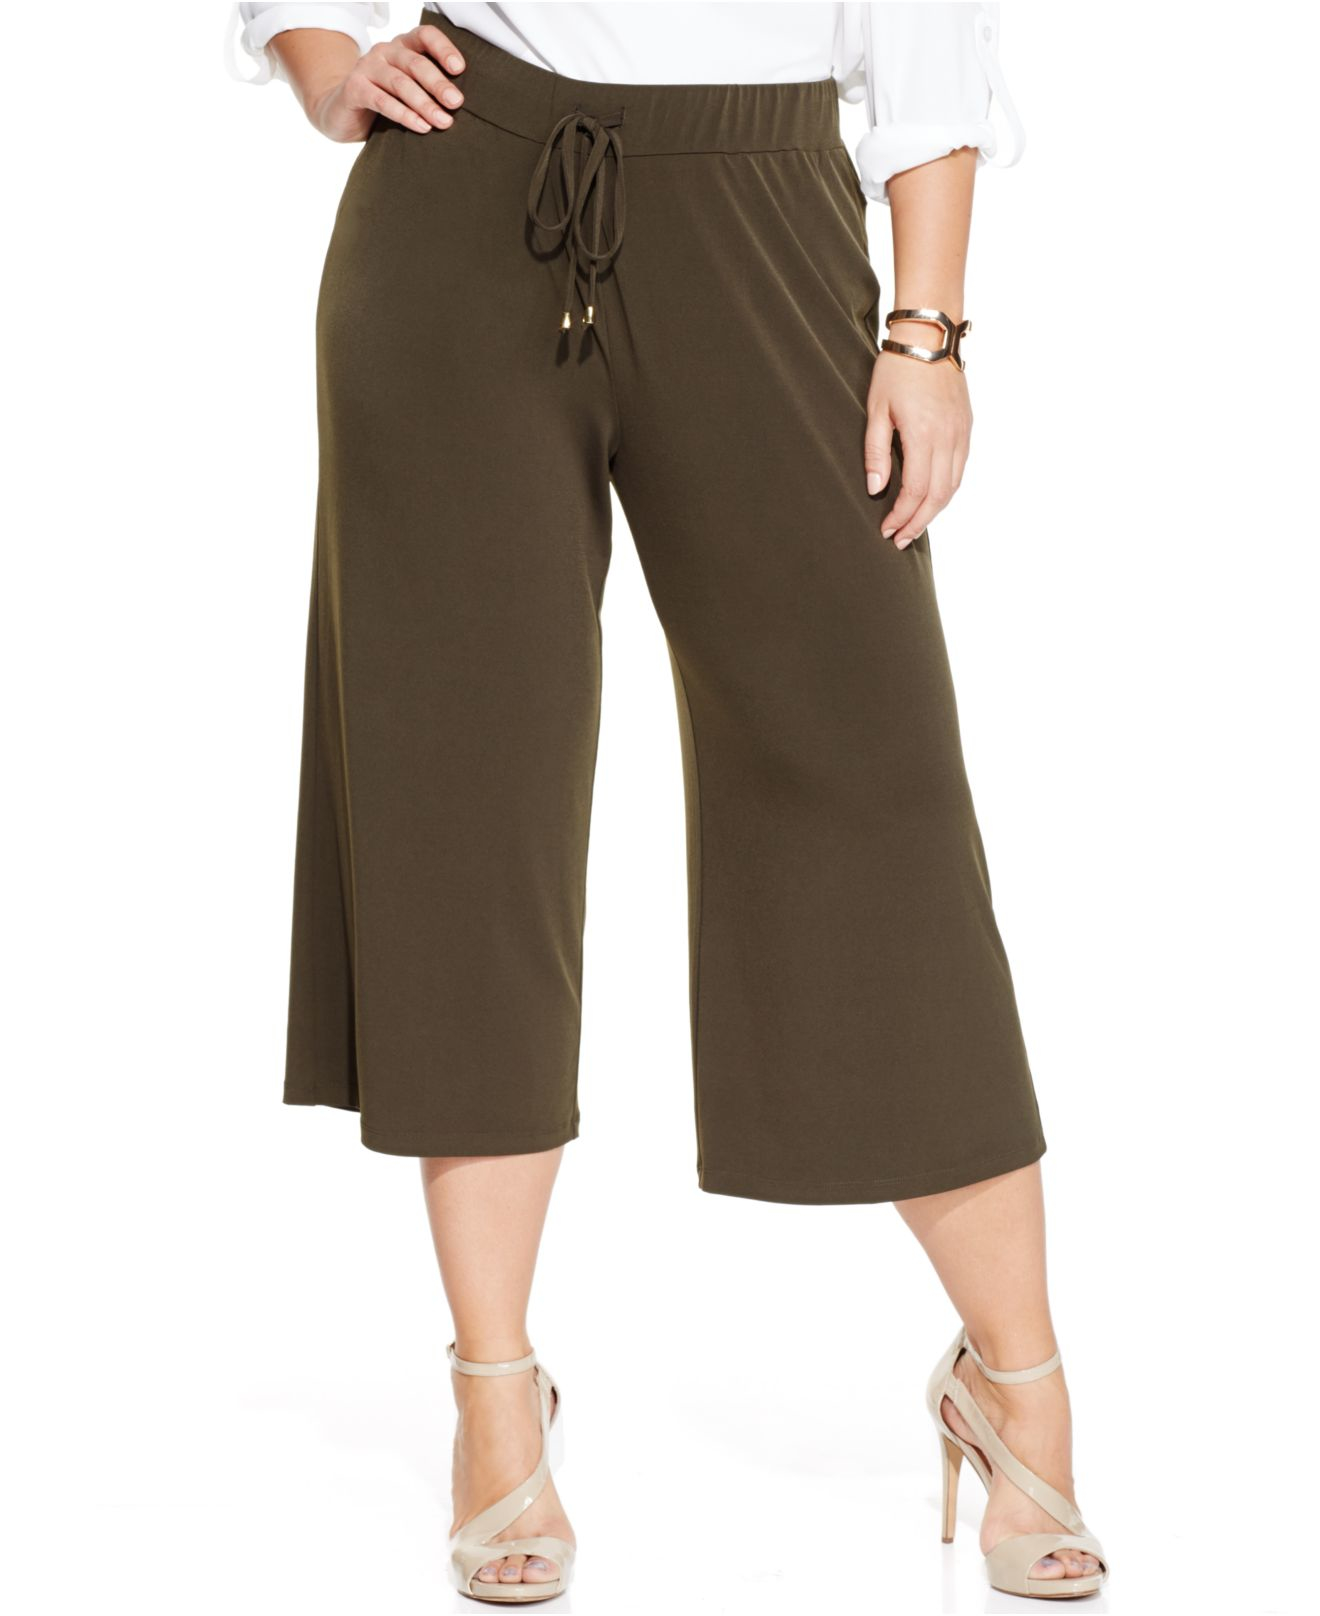 Lyst - Jones New York Signature Plus Size Cropped Wide-Leg Pants in Green